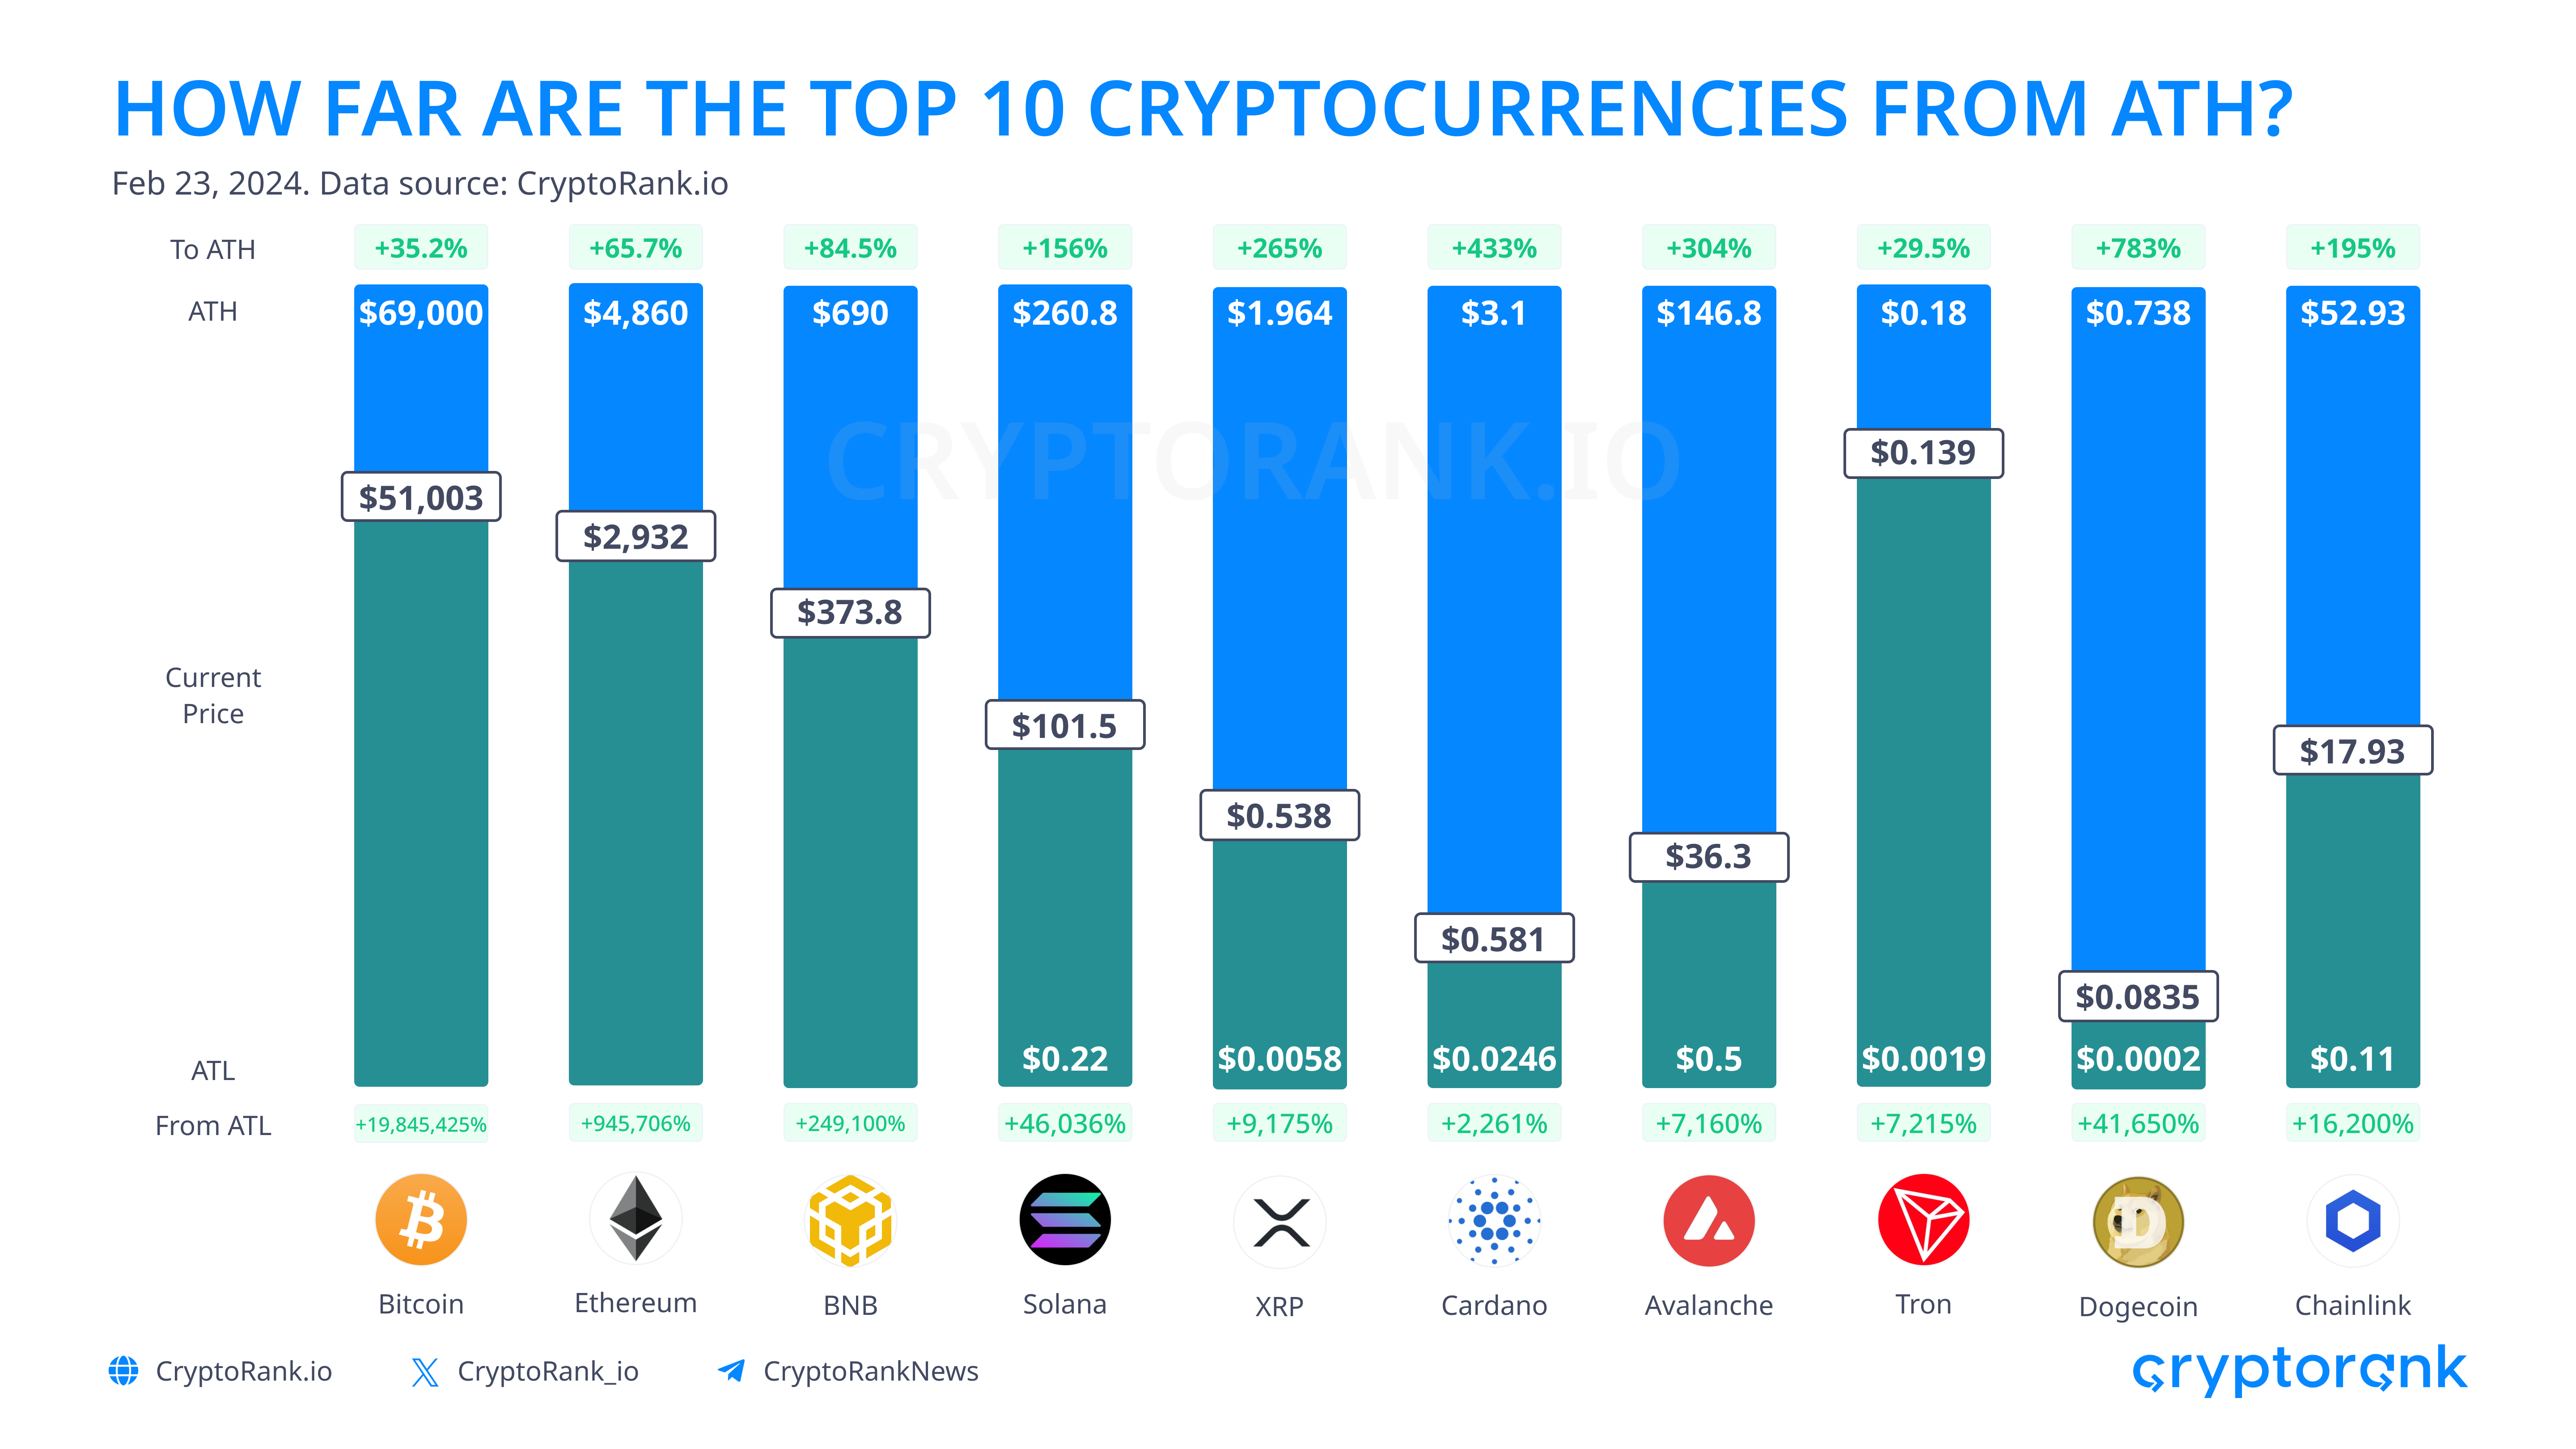 How Far Are The Top 10 Cryptocurrencies From All Time High?